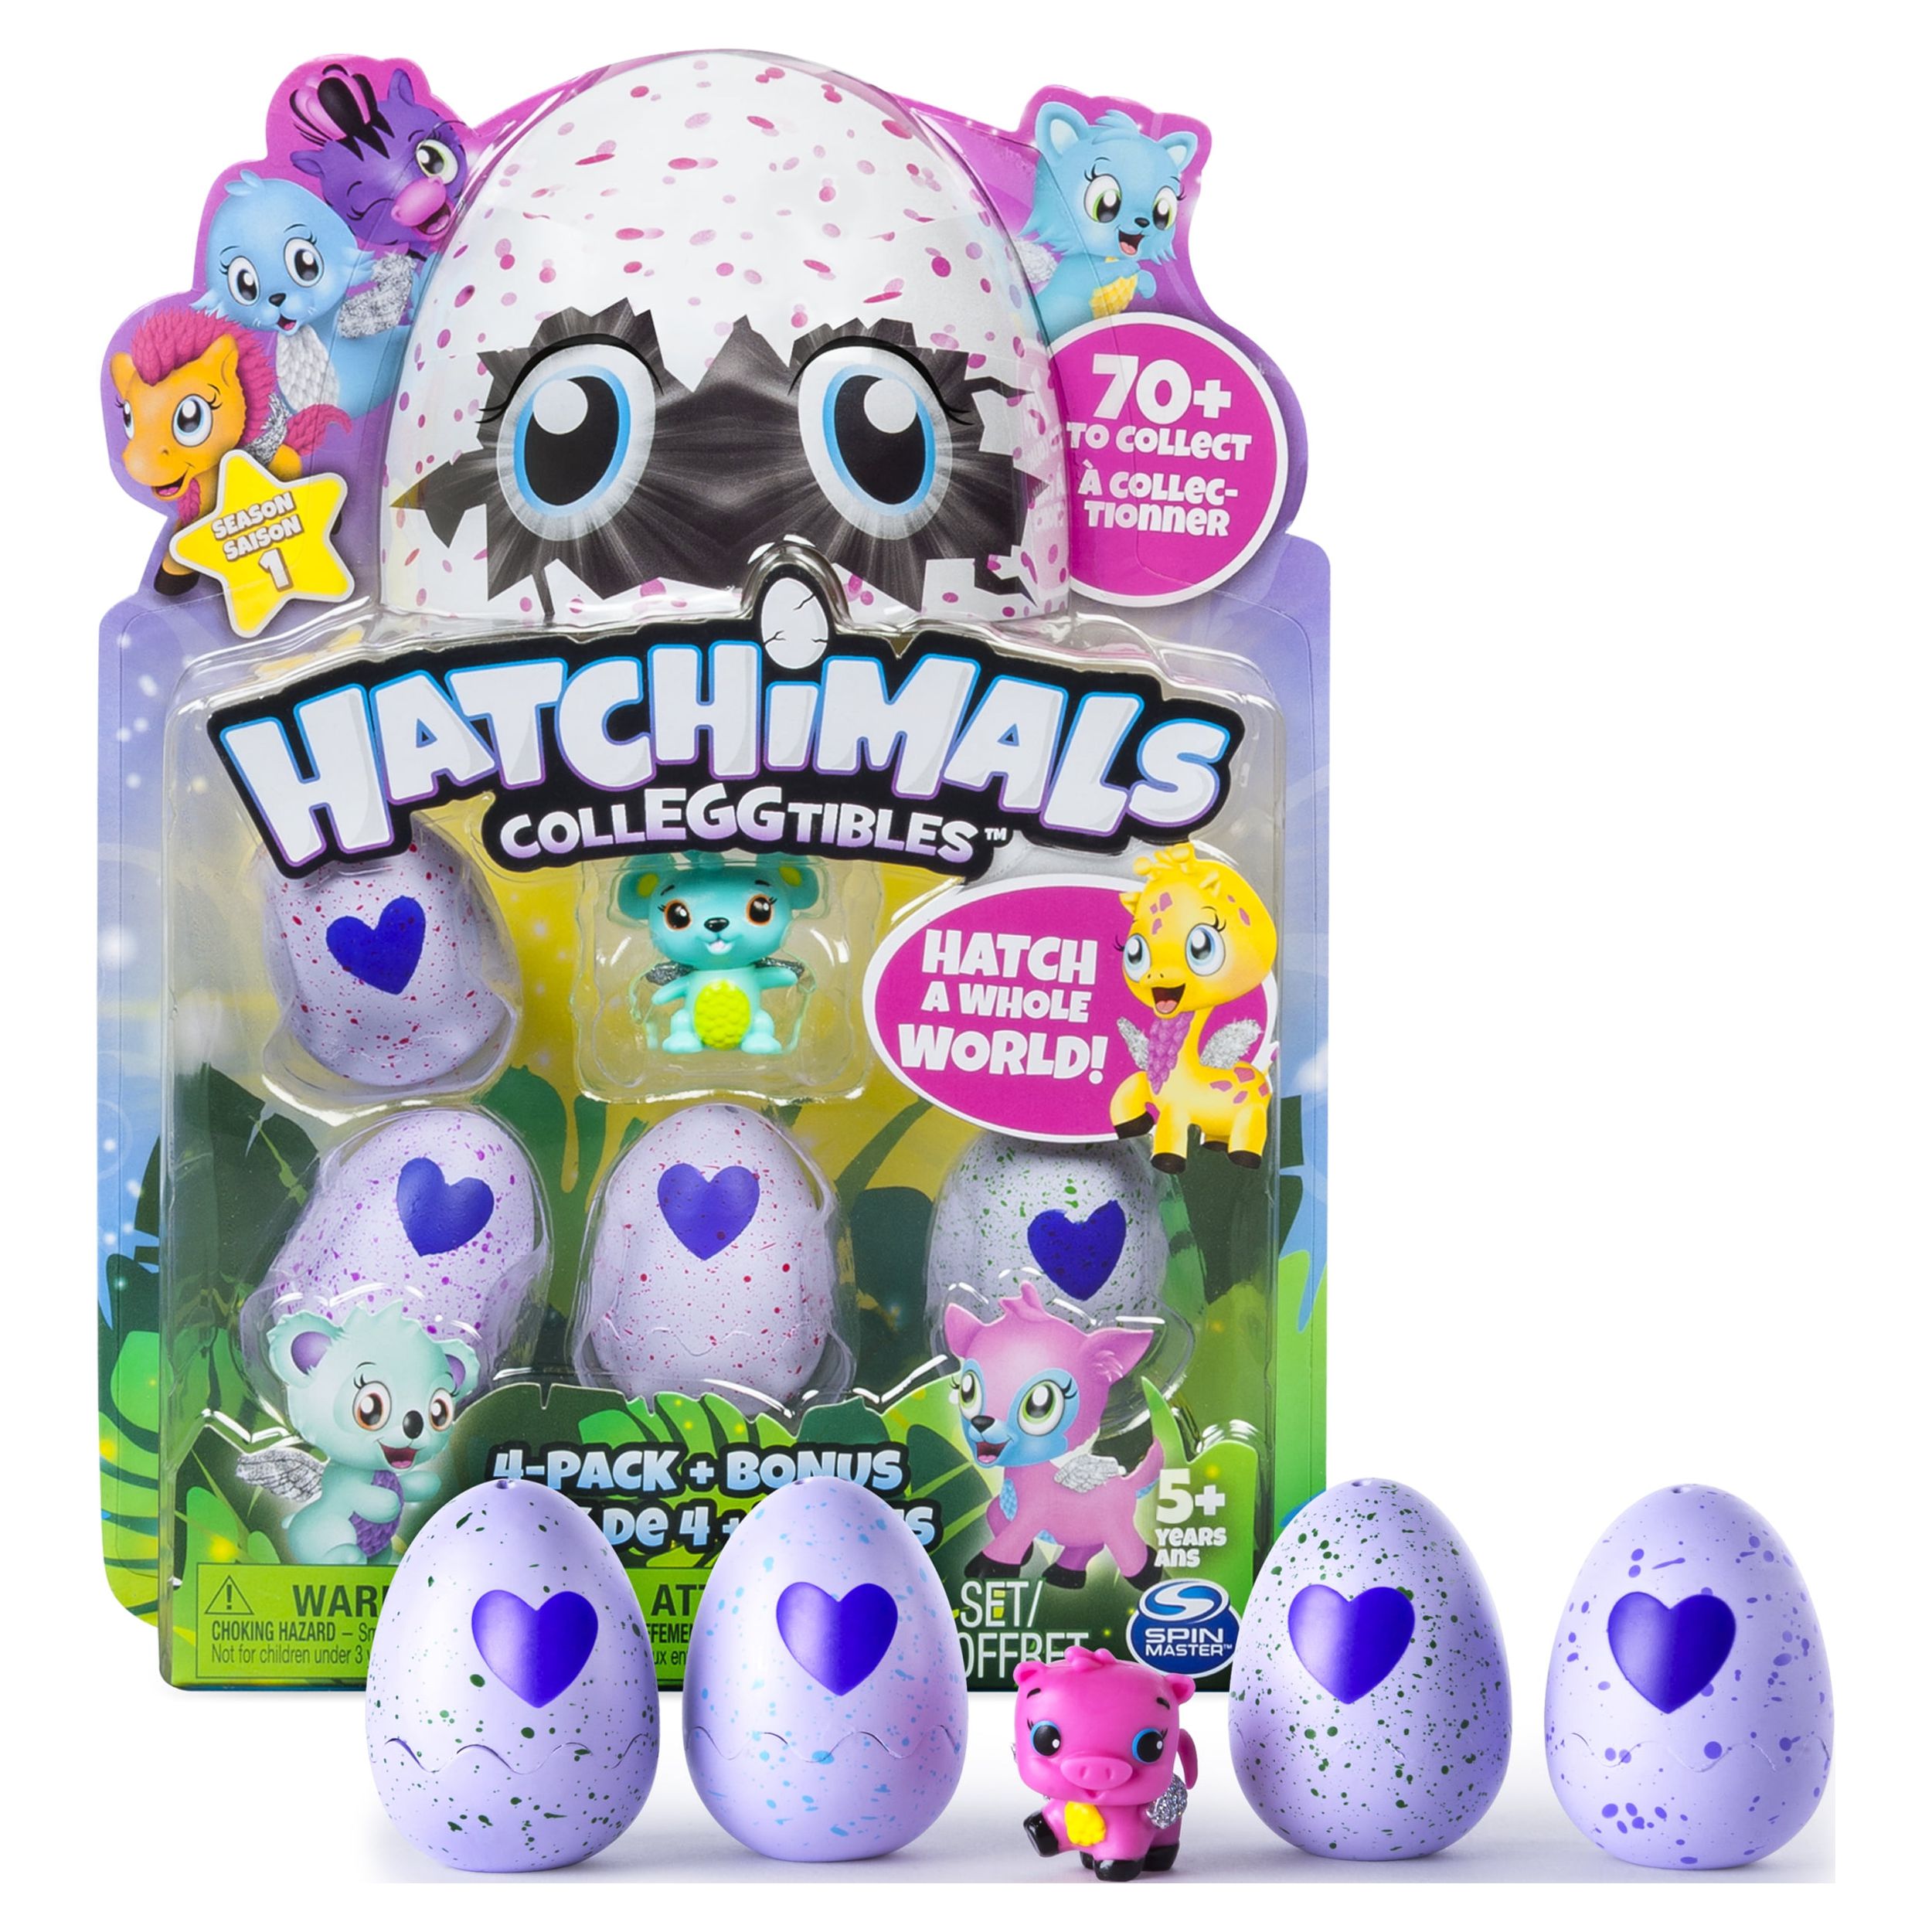 Hatchimals, CollEGGtibles, 4 Pack + Bonus (Styles & Colors May Vary) by Spin Master - Electronic Pets - image 1 of 14